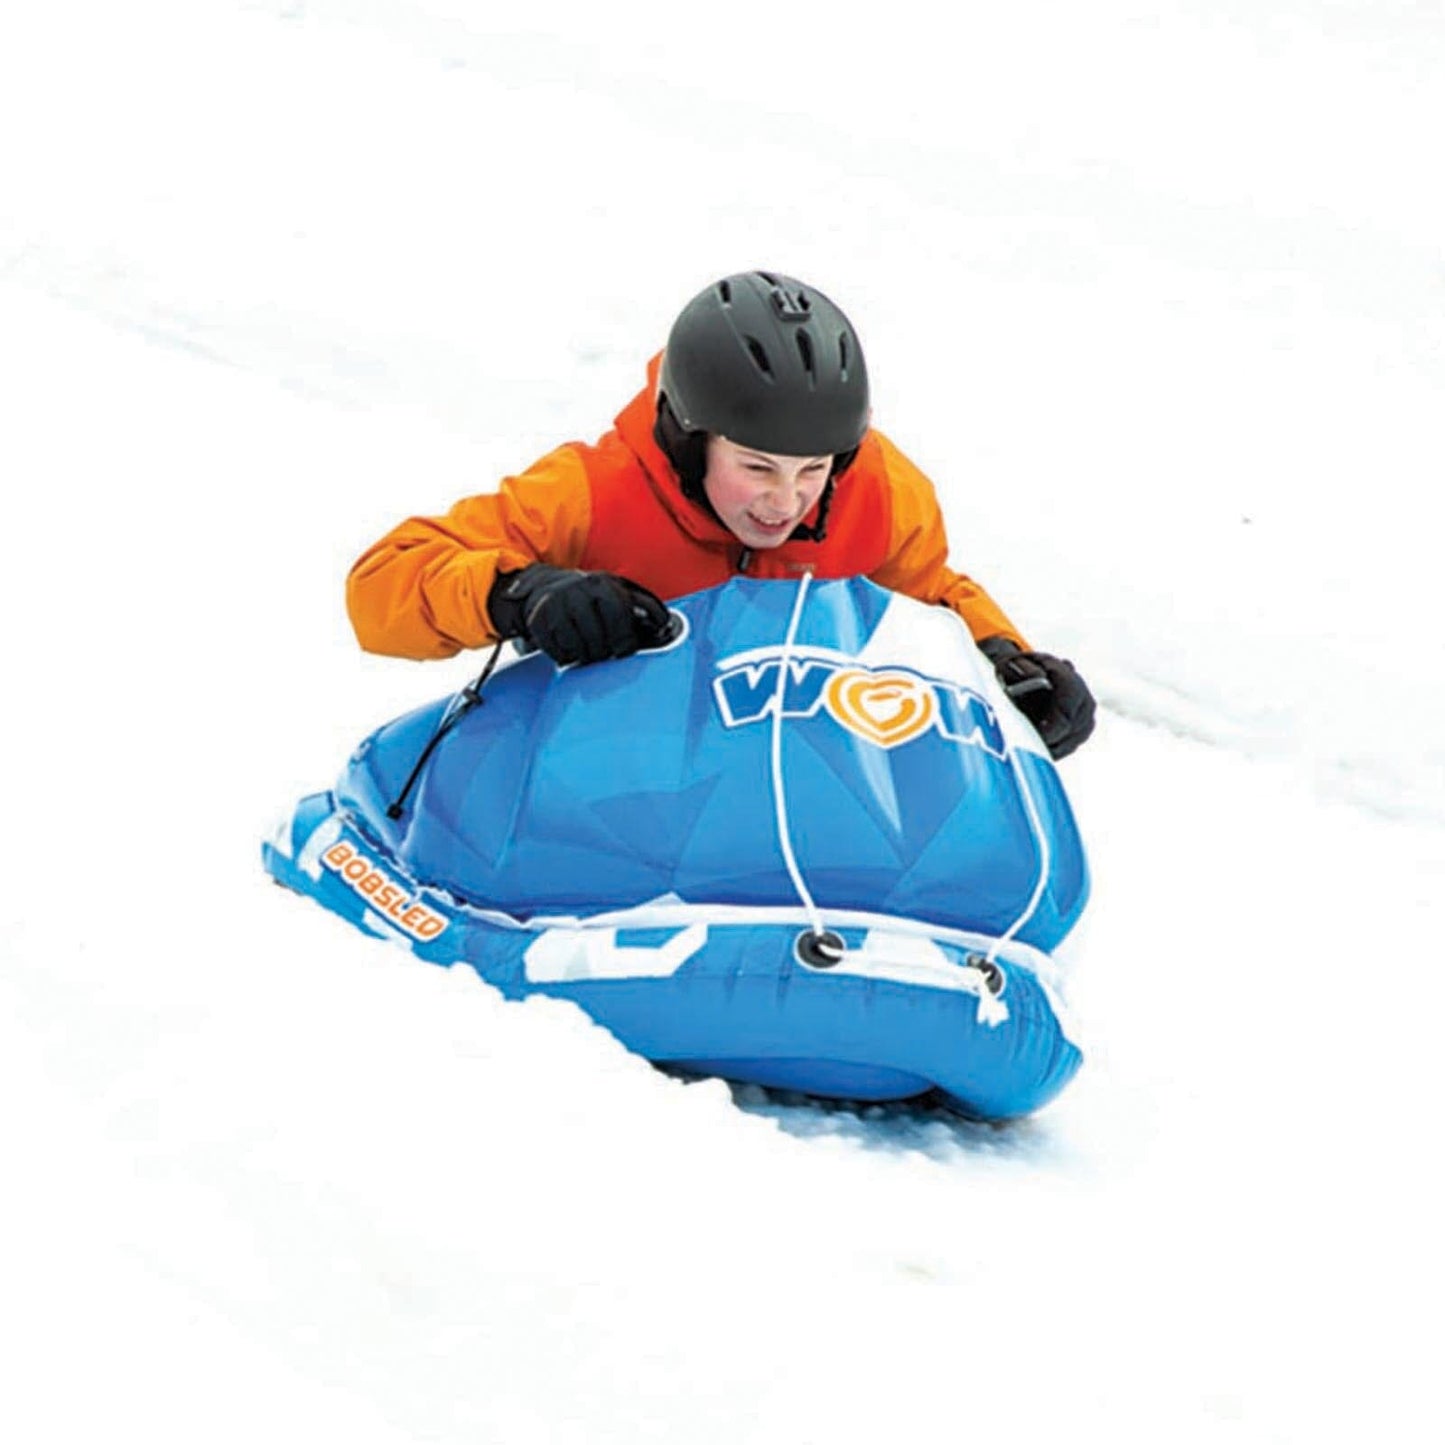 The WOW Bobsled Snow Tube